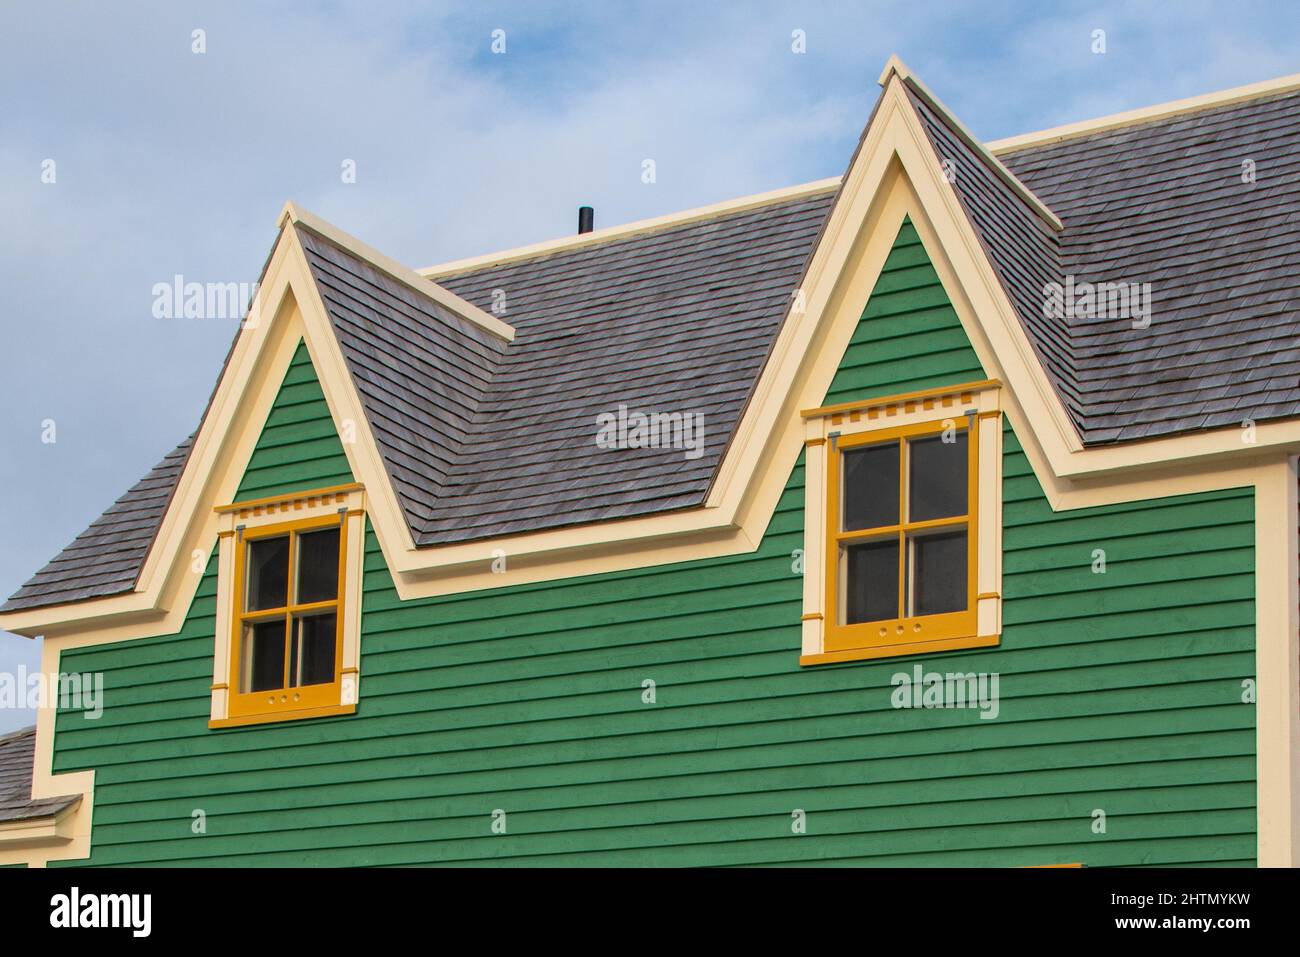 Teal green vintage building with cream trim and dark roof shingles. The top of the building has two dormers and multiple old single hung windows. Stock Photo